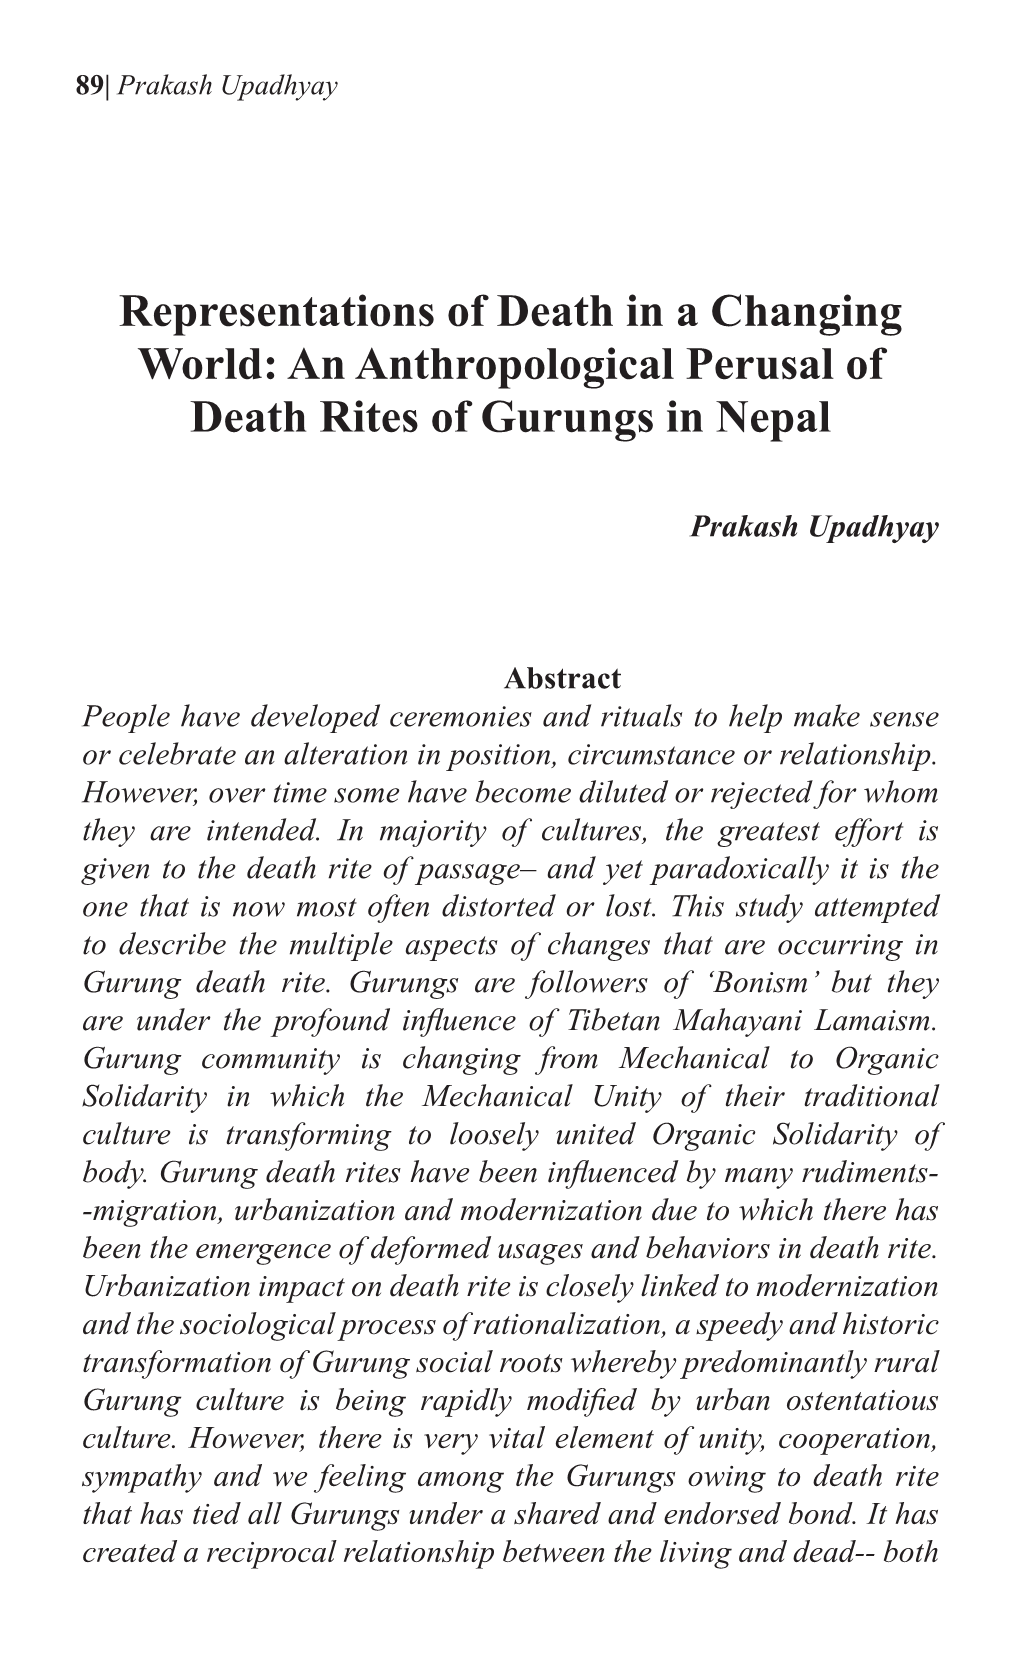 Representations of Death in a Changing World: an Anthropological Perusal of Death Rites of Gurungs in Nepal